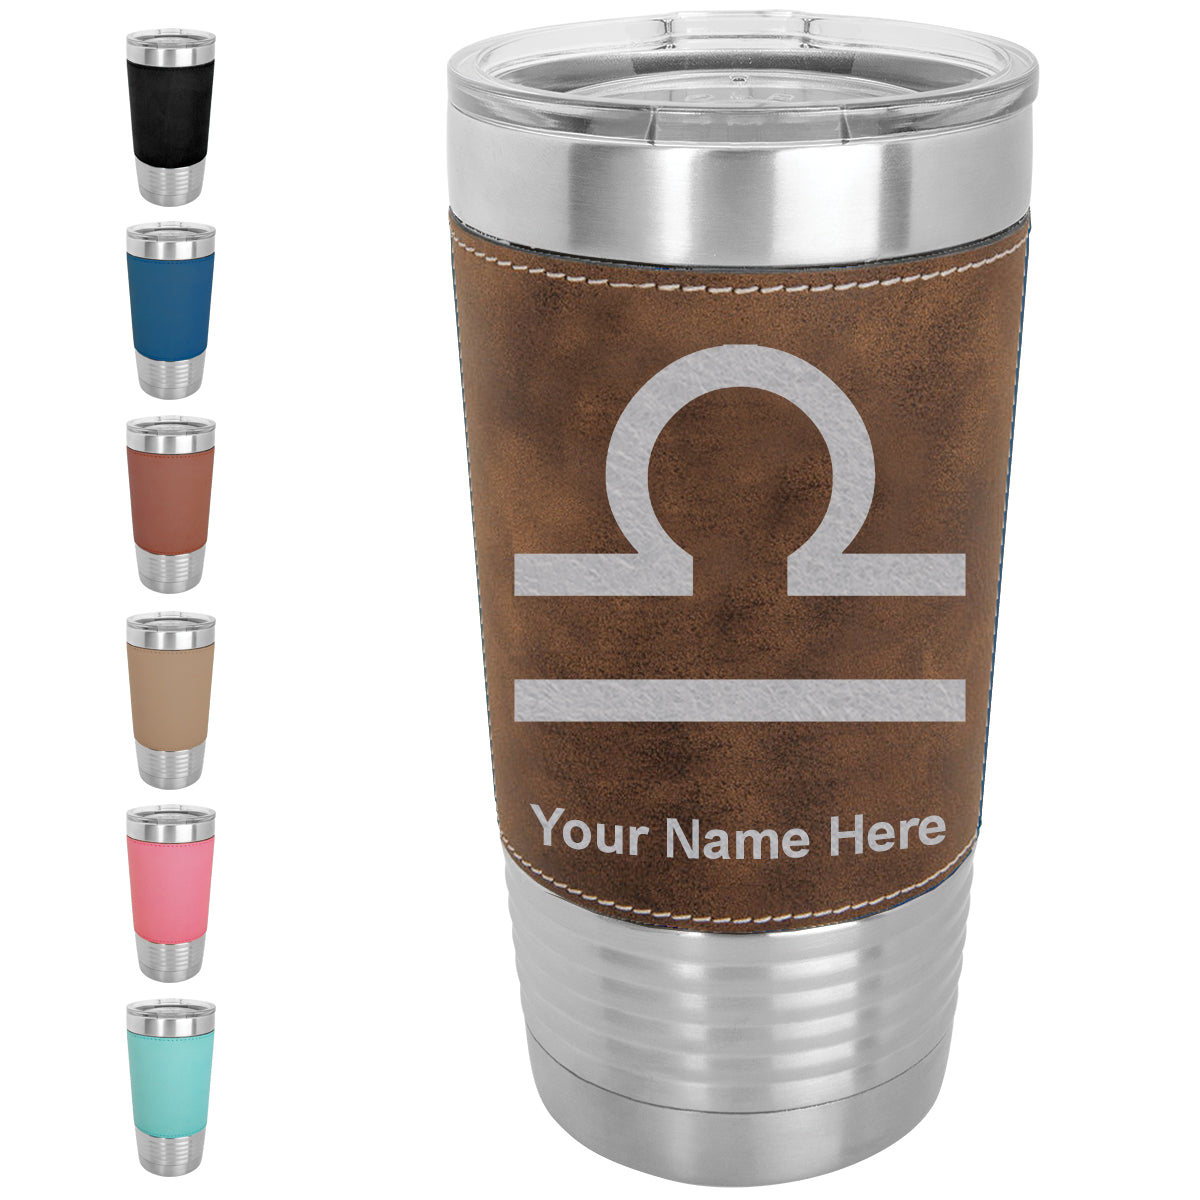 20oz Faux Leather Tumbler Mug, Zodiac Sign Libra, Personalized Engraving Included